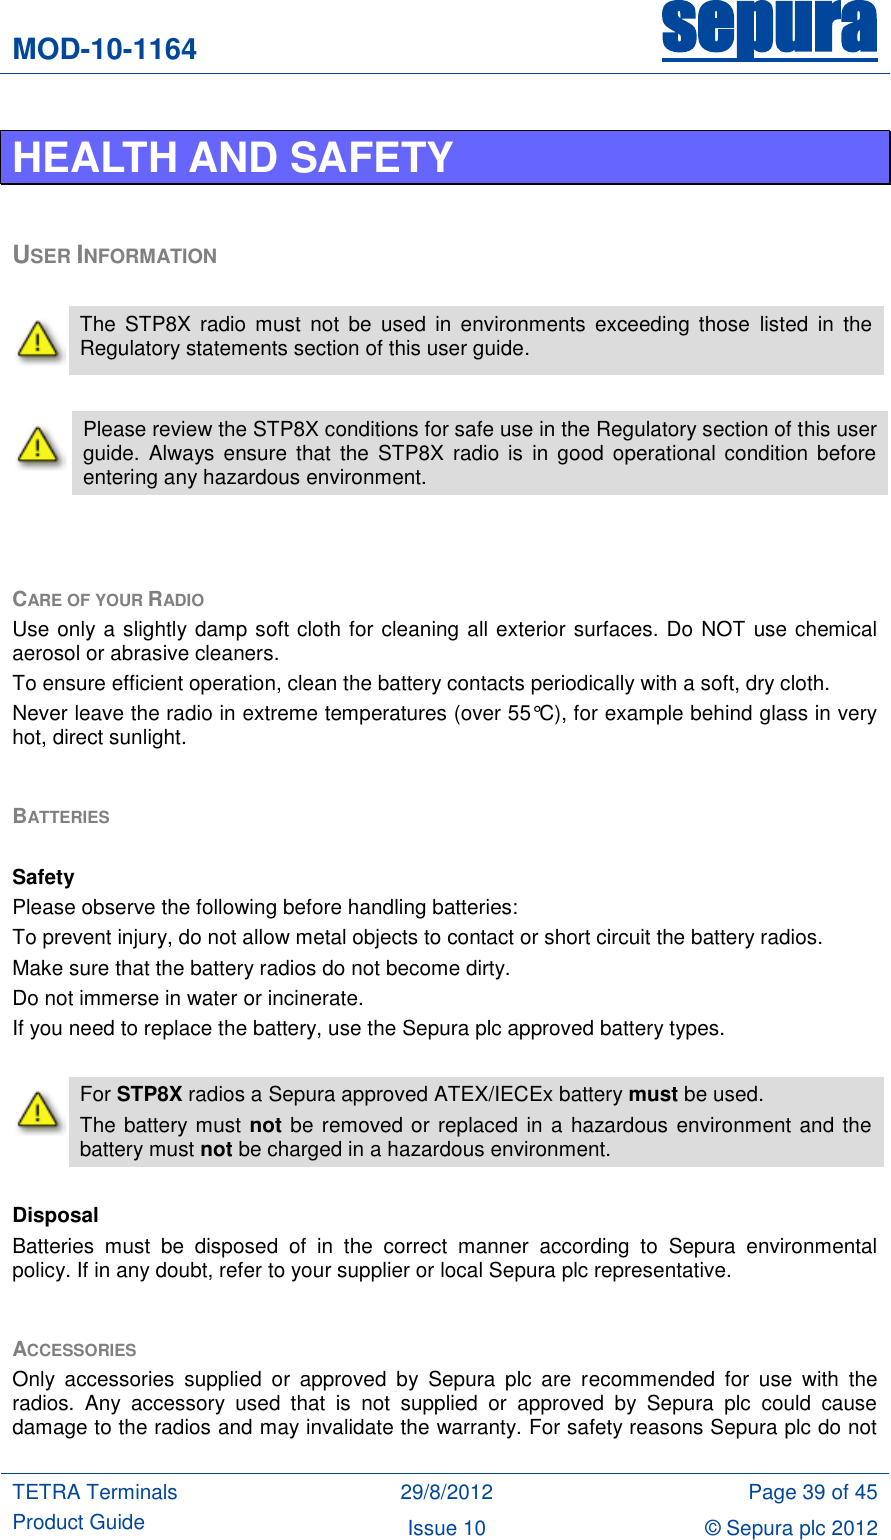 MOD-10-1164 sepura  TETRA Terminals Product Guide 29/8/2012 Page 39 of 45 Issue 10 © Sepura plc 2012   HEALTH AND SAFETY  USER INFORMATION   The  STP8X  radio  must  not  be  used  in  environments  exceeding those  listed  in  the Regulatory statements section of this user guide.   Please review the STP8X conditions for safe use in the Regulatory section of this user guide.  Always  ensure  that  the  STP8X  radio is  in  good operational condition  before entering any hazardous environment.    CARE OF YOUR RADIO Use only a slightly damp soft cloth for cleaning all exterior surfaces. Do NOT use chemical aerosol or abrasive cleaners.  To ensure efficient operation, clean the battery contacts periodically with a soft, dry cloth. Never leave the radio in extreme temperatures (over 55°C), for example behind glass in very hot, direct sunlight.  BATTERIES   Safety Please observe the following before handling batteries: To prevent injury, do not allow metal objects to contact or short circuit the battery radios. Make sure that the battery radios do not become dirty. Do not immerse in water or incinerate. If you need to replace the battery, use the Sepura plc approved battery types.   For STP8X radios a Sepura approved ATEX/IECEx battery must be used. The battery must not be removed or replaced in a hazardous environment and the battery must not be charged in a hazardous environment.  Disposal Batteries  must  be  disposed  of  in  the  correct  manner  according  to  Sepura  environmental policy. If in any doubt, refer to your supplier or local Sepura plc representative.  ACCESSORIES Only  accessories  supplied  or  approved  by  Sepura  plc  are  recommended  for  use  with  the radios.  Any  accessory  used  that  is  not  supplied  or  approved  by  Sepura  plc  could  cause damage to the radios and may invalidate the warranty. For safety reasons Sepura plc do not 